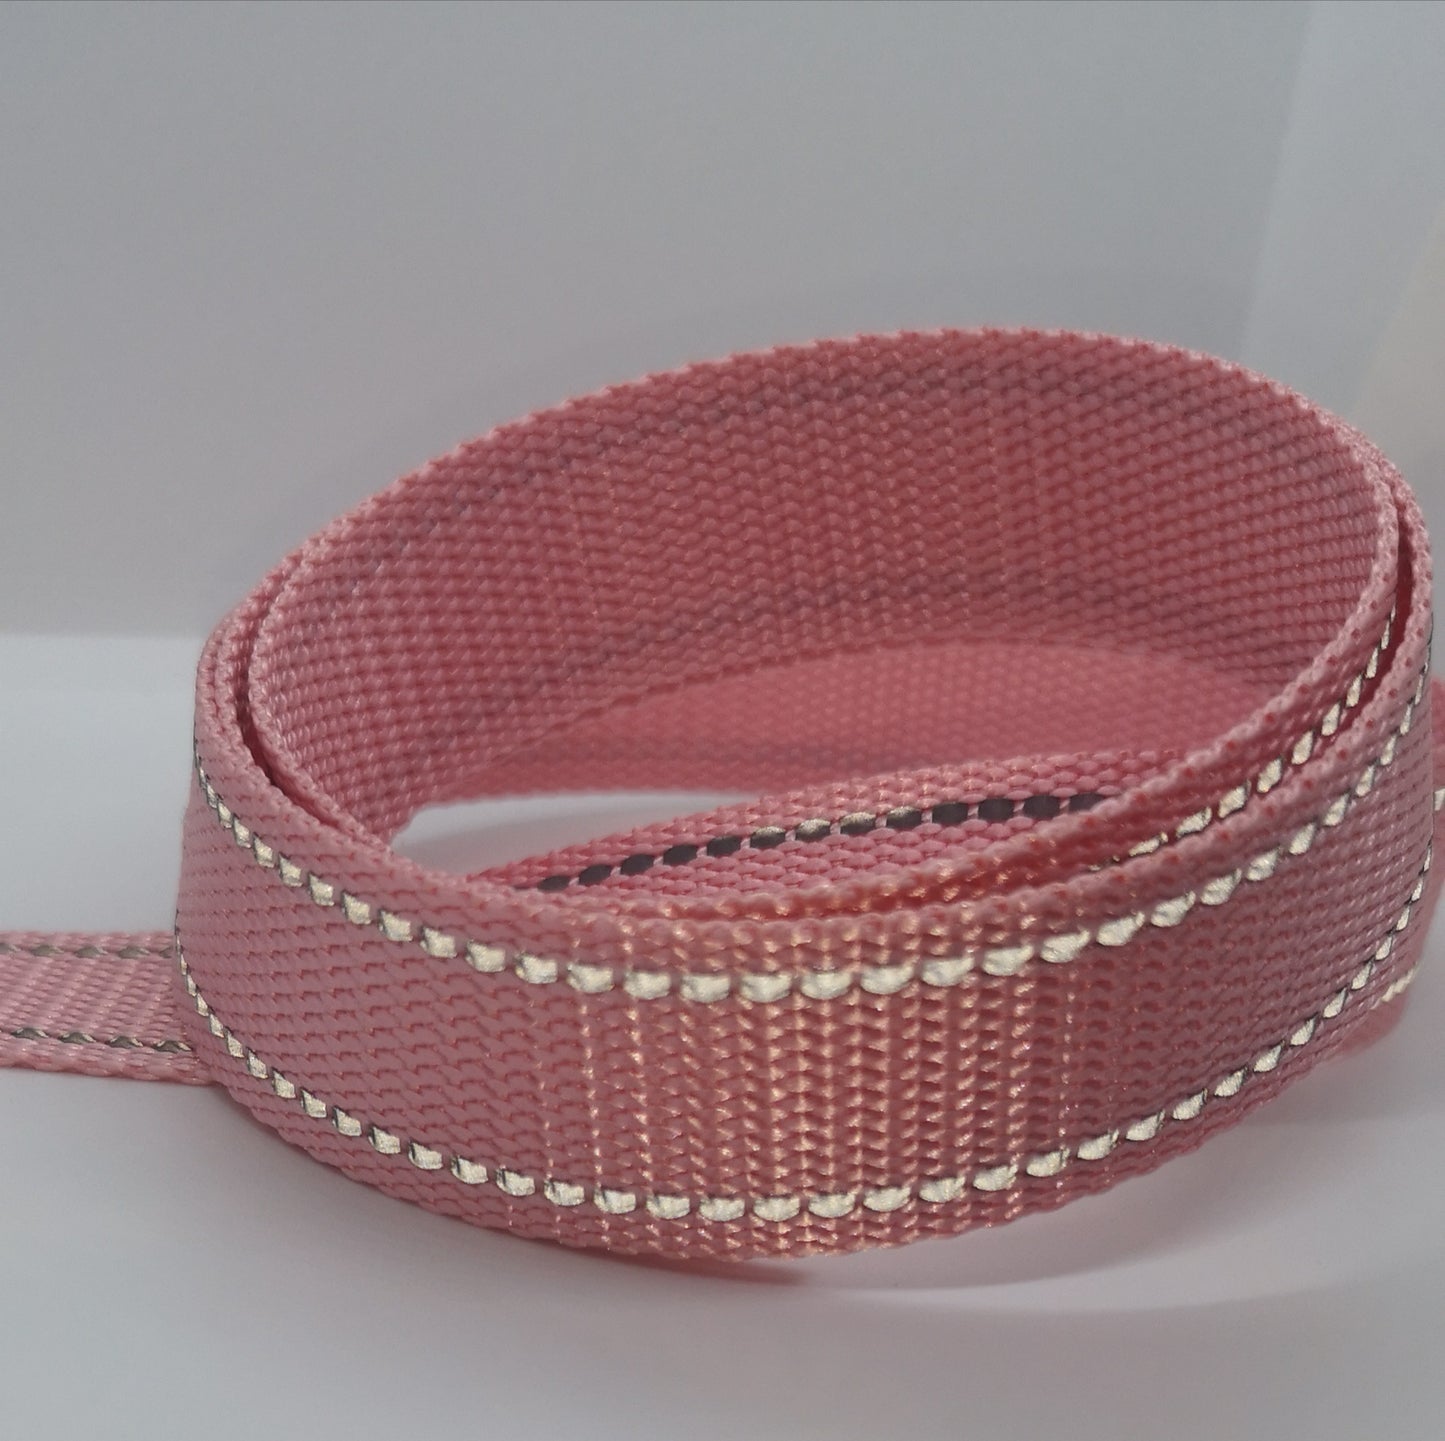 1" Wide Webbing - Solid Color with Reflective- PINK